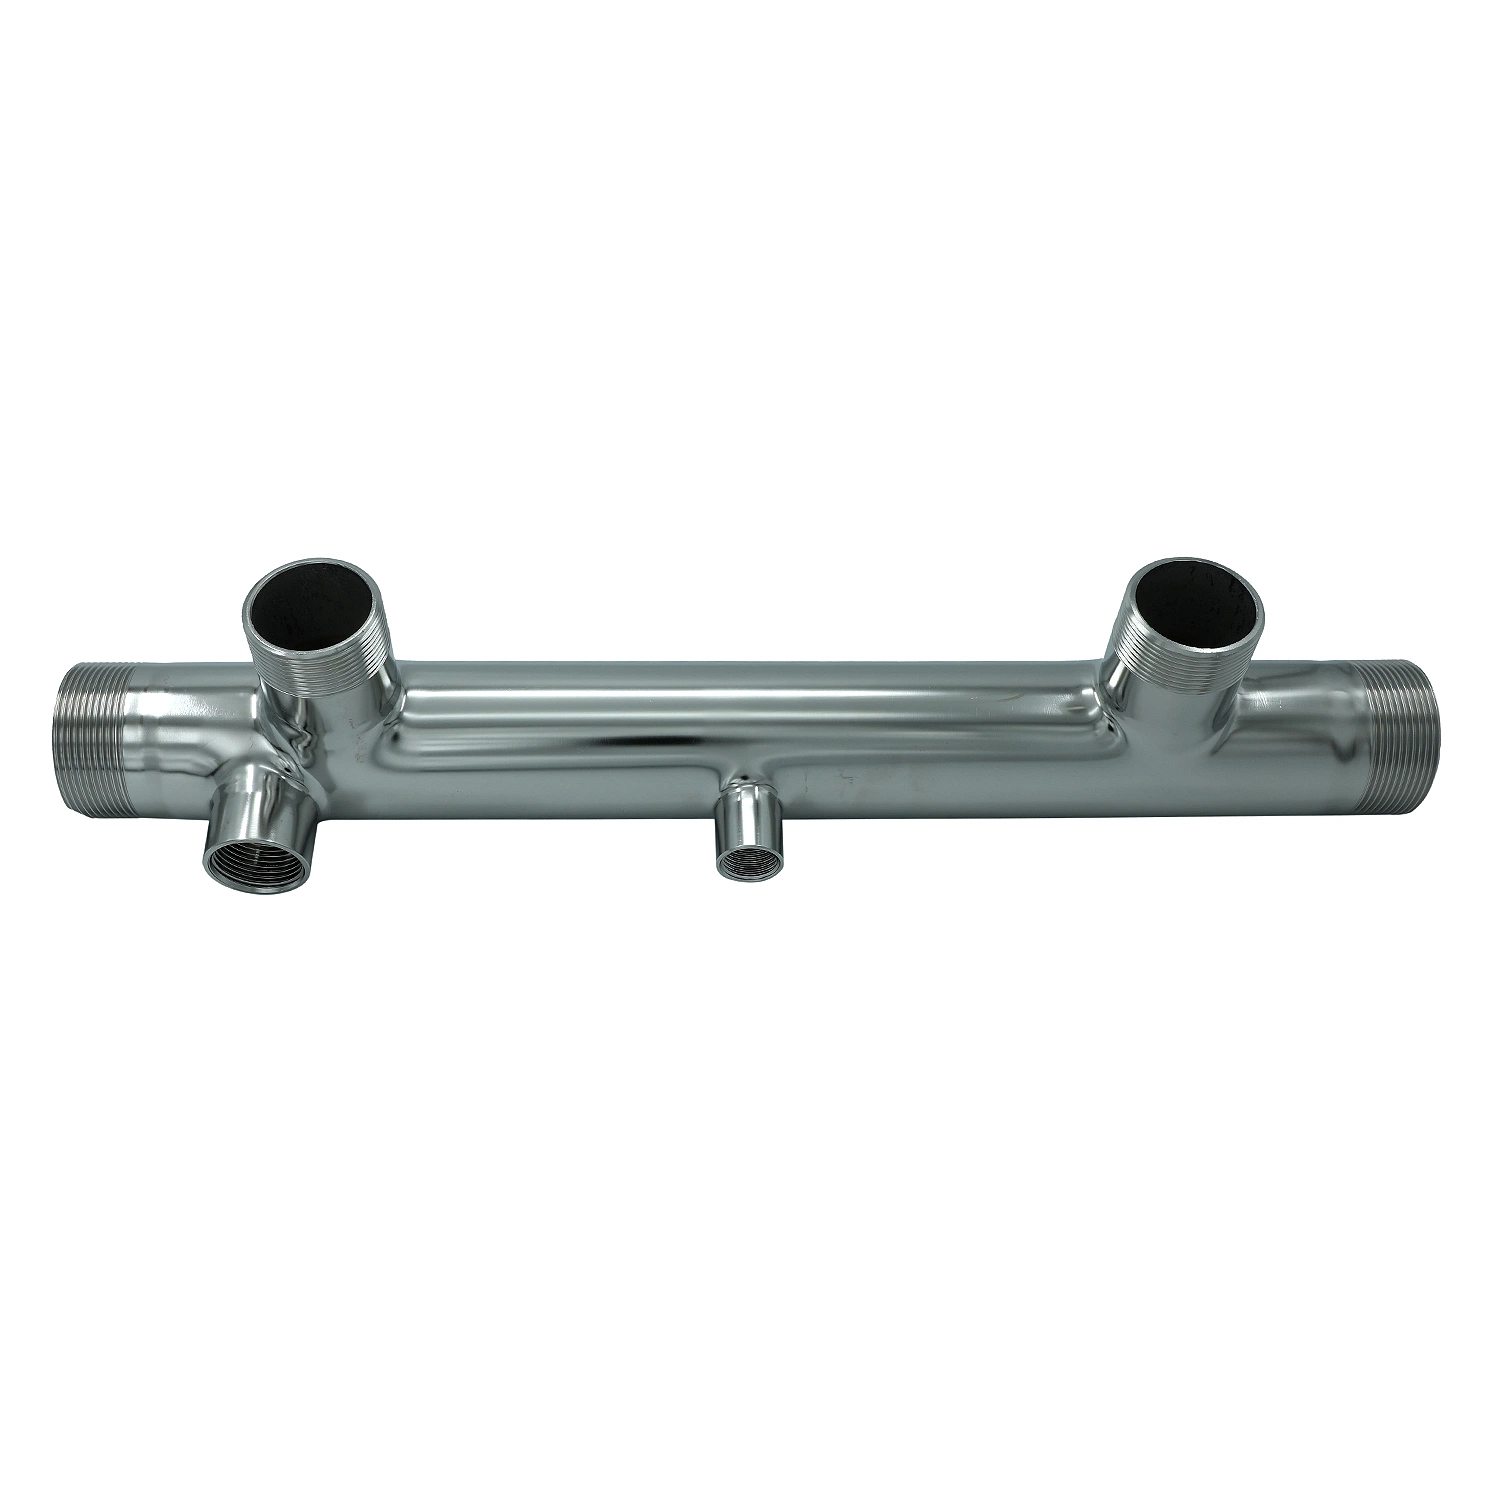 Stainless Steel Suction Manifold for Booster Pump Systems (YZF-PM06)